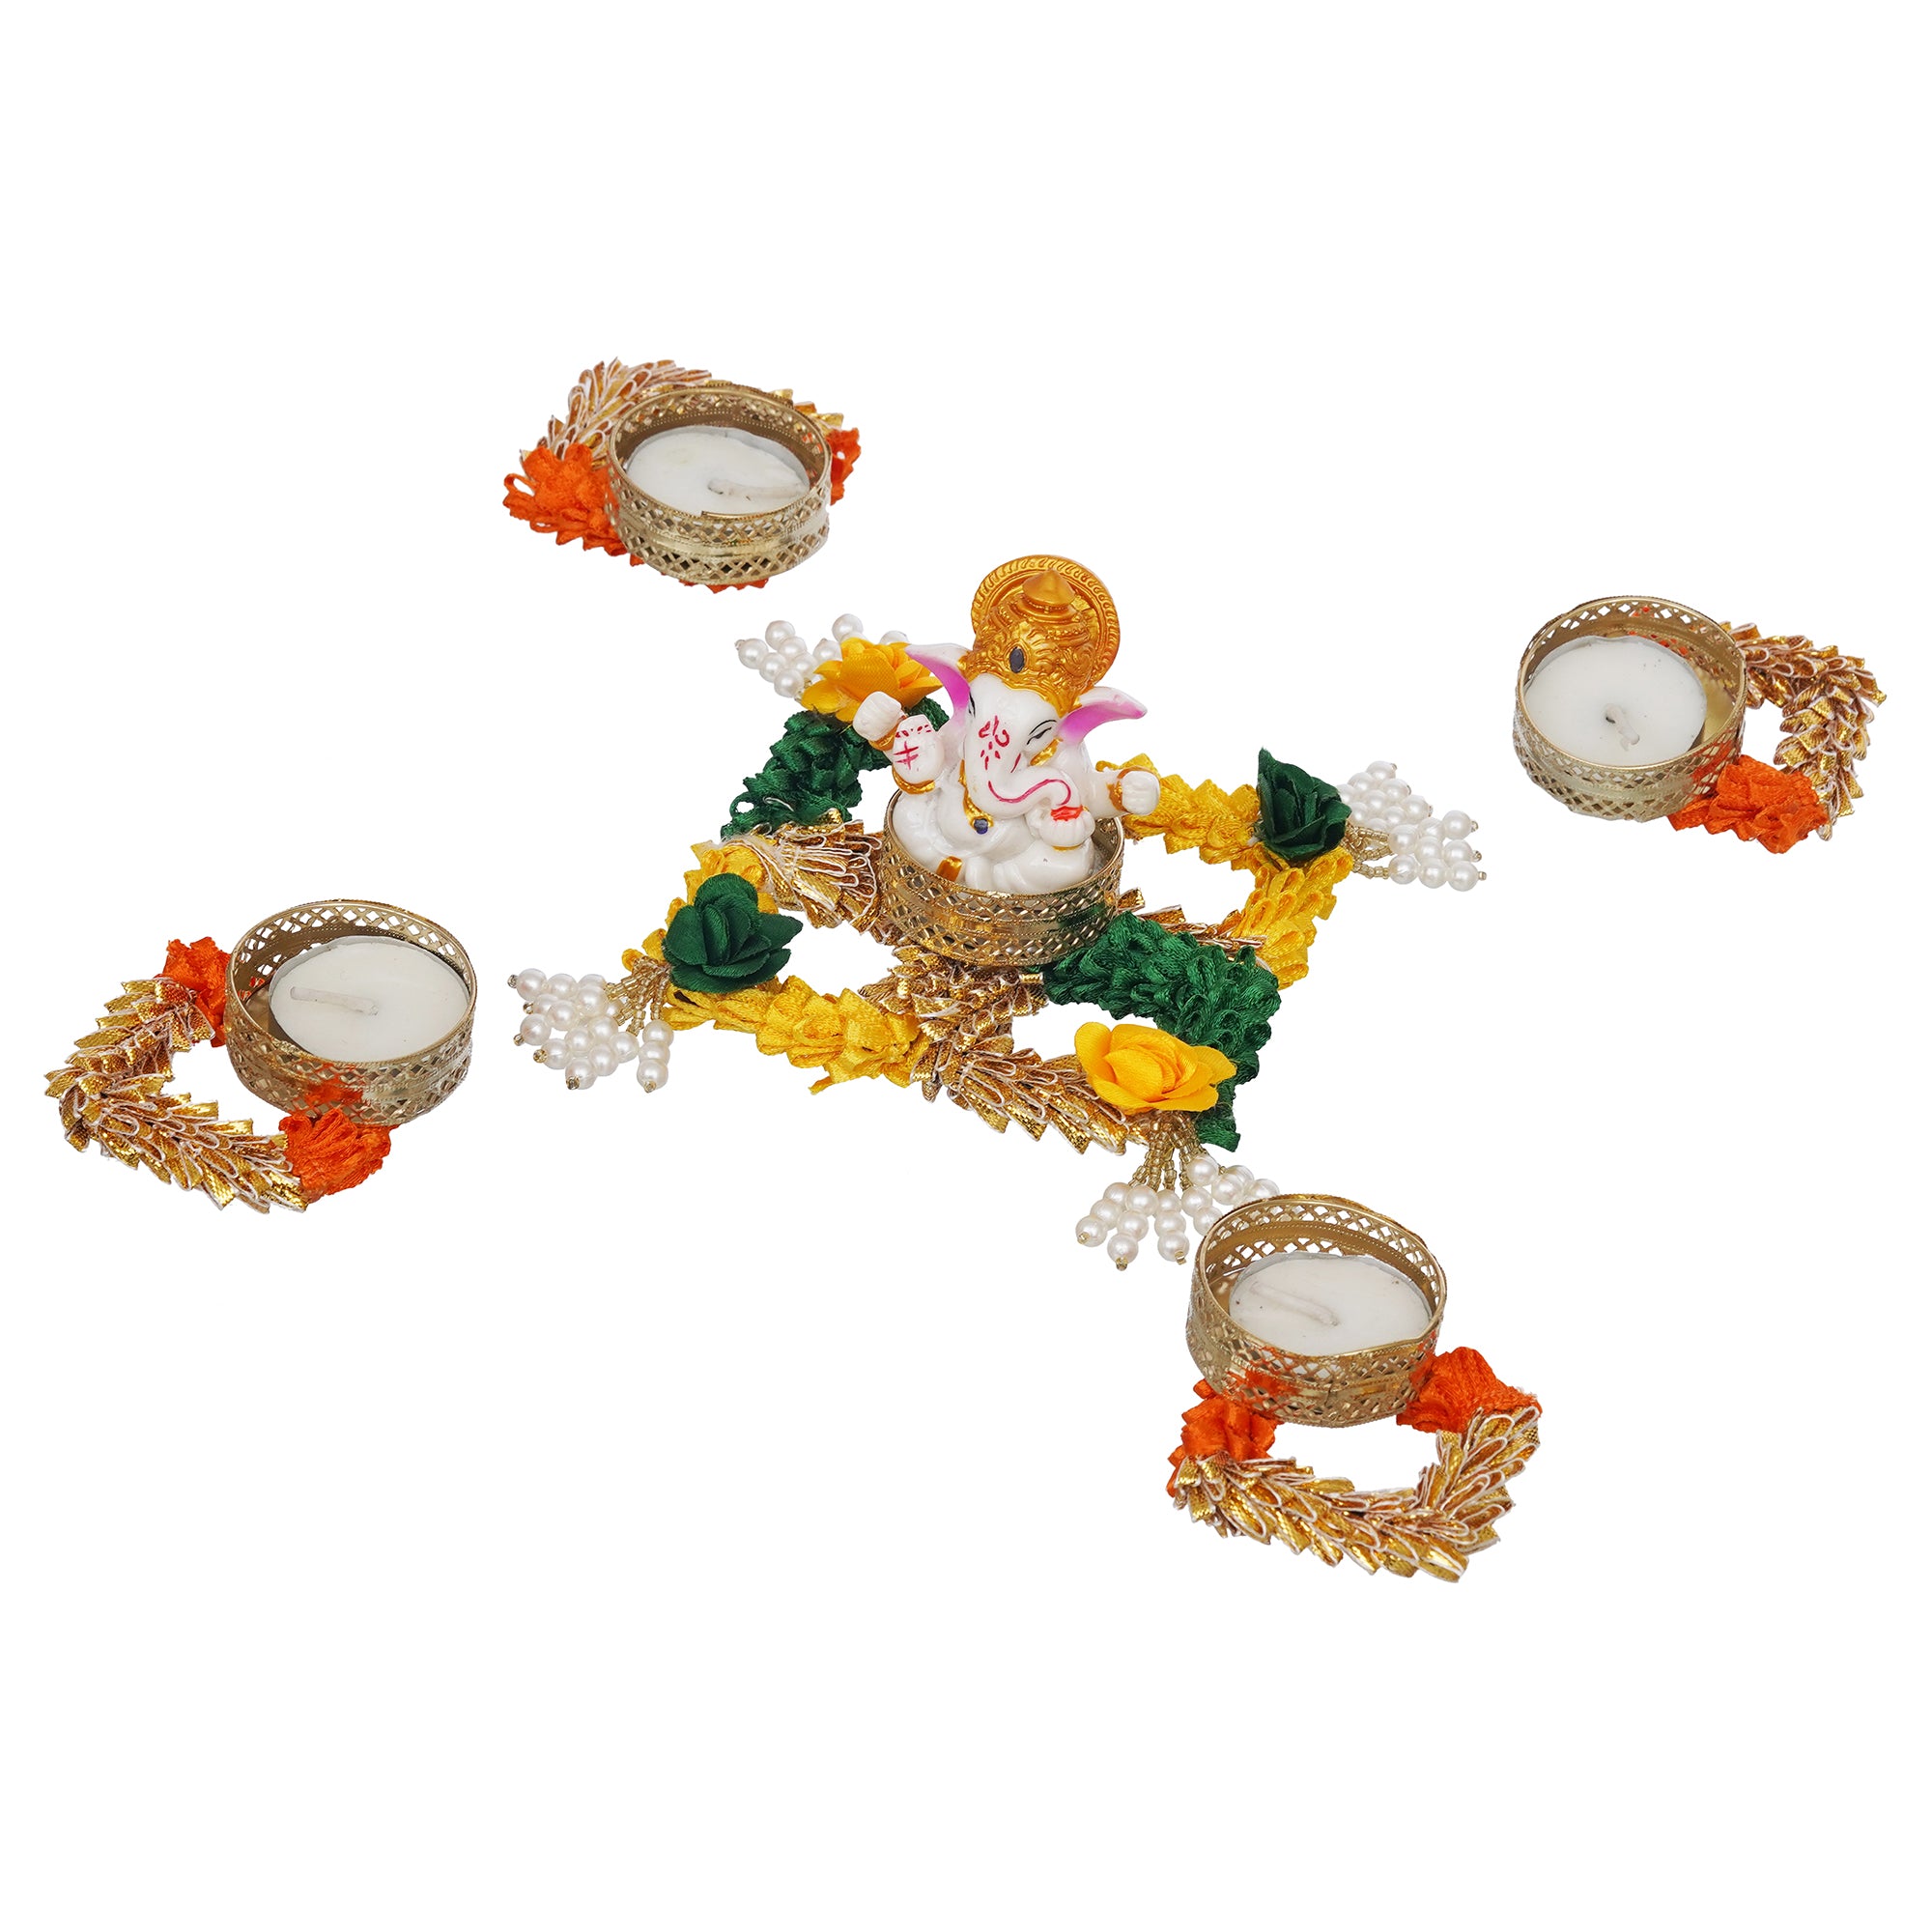 eCraftIndia Lord Ganesha Idol on Floral and Beads Embellished Handcrafted Plate with 4 Decorative Tea Light Candle Holders 7